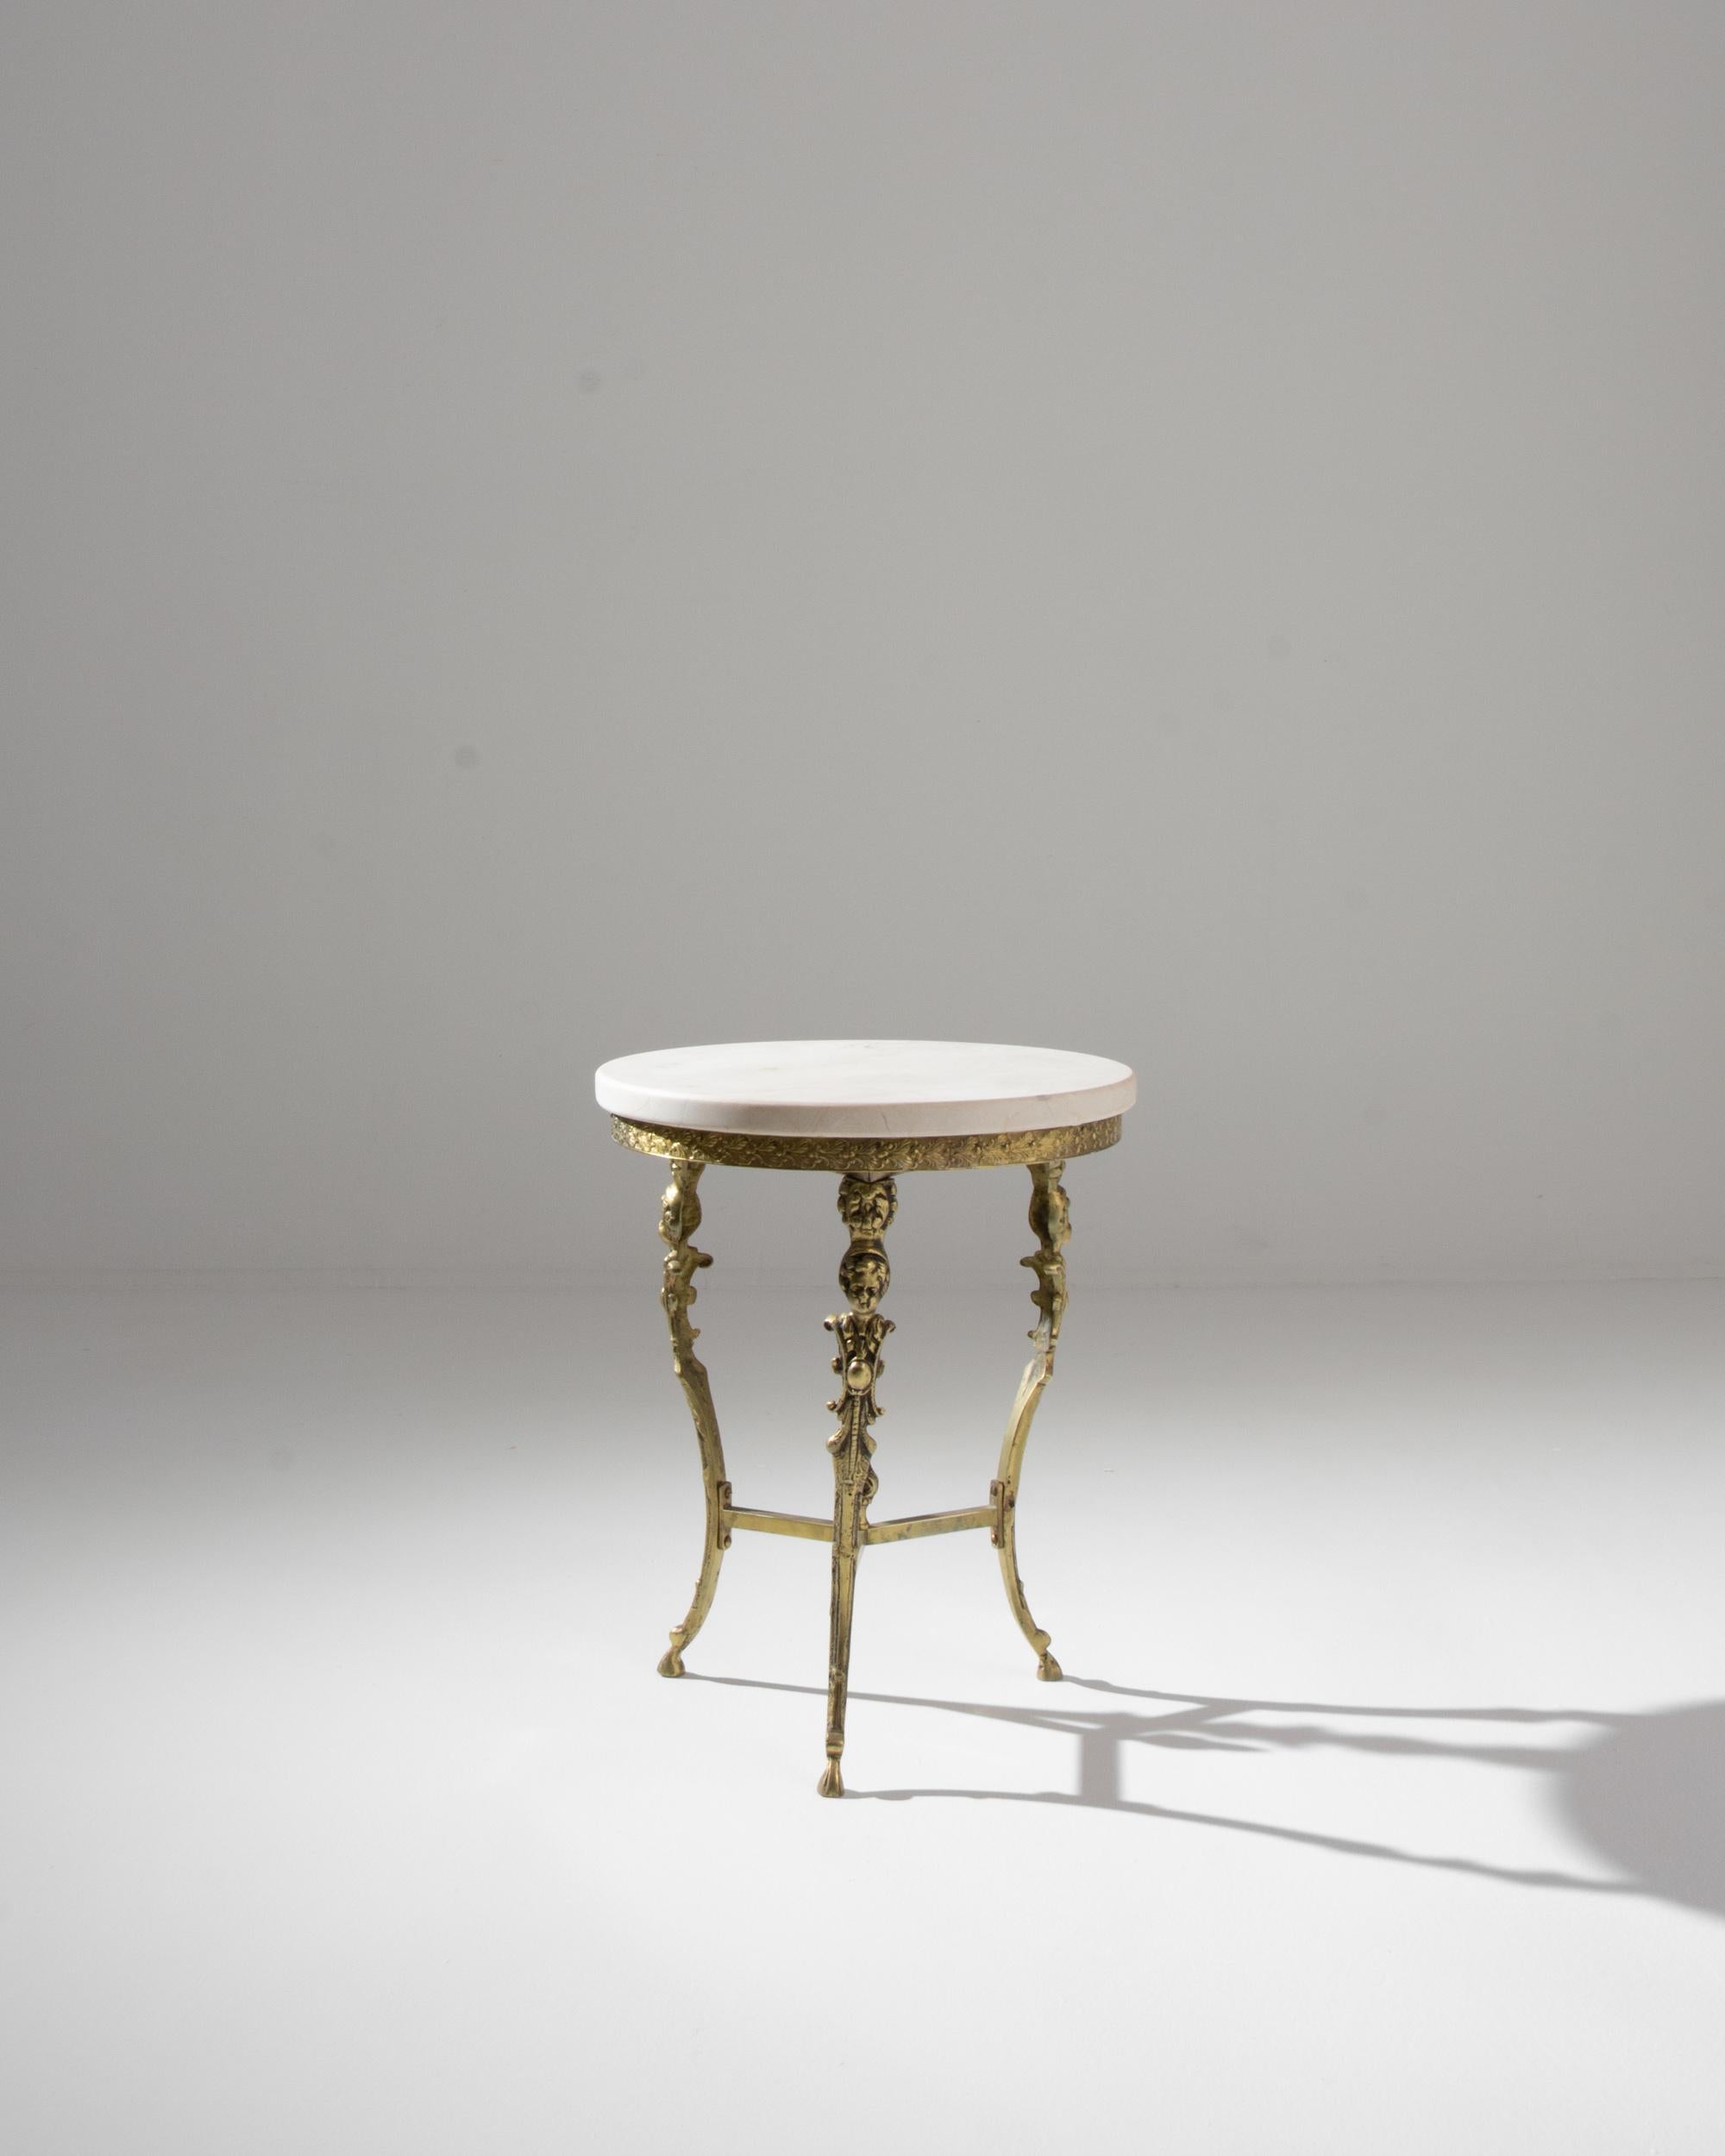 Ornate and light-footed, this vintage brass table conjures the elegance of an earlier age. Made in France in the 20th century, a circular tabletop of pale white marble sits atop a gilded base; dainty hoofed feet create a sprightly posture. The legs